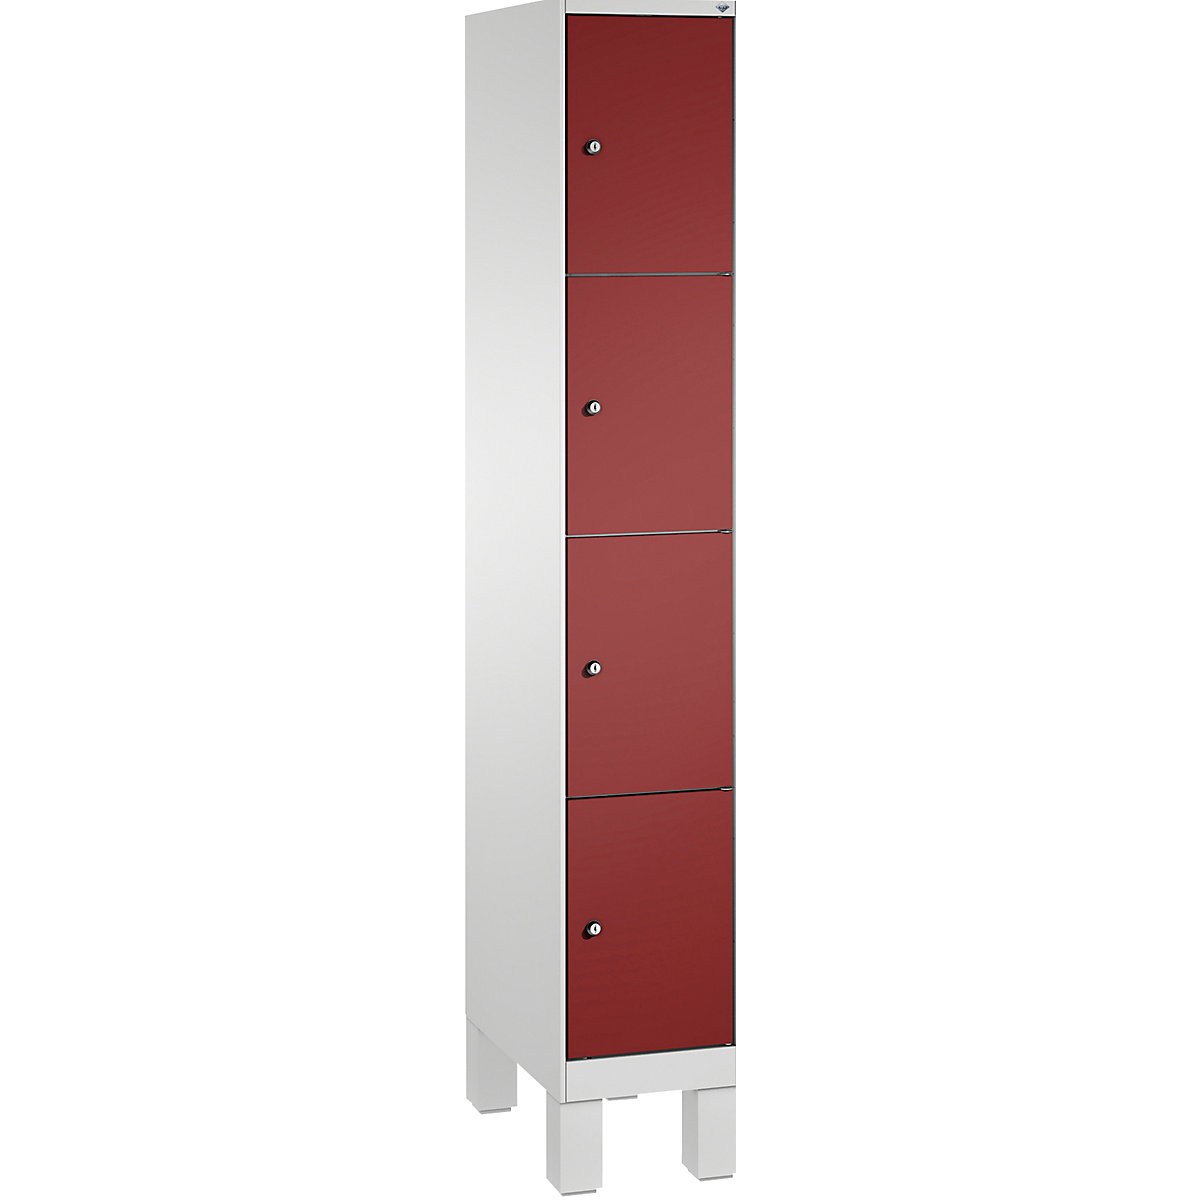 EVOLO locker unit, with feet – C+P, 1 compartment, 4 shelf compartments, compartment width 300 mm, light grey / ruby red